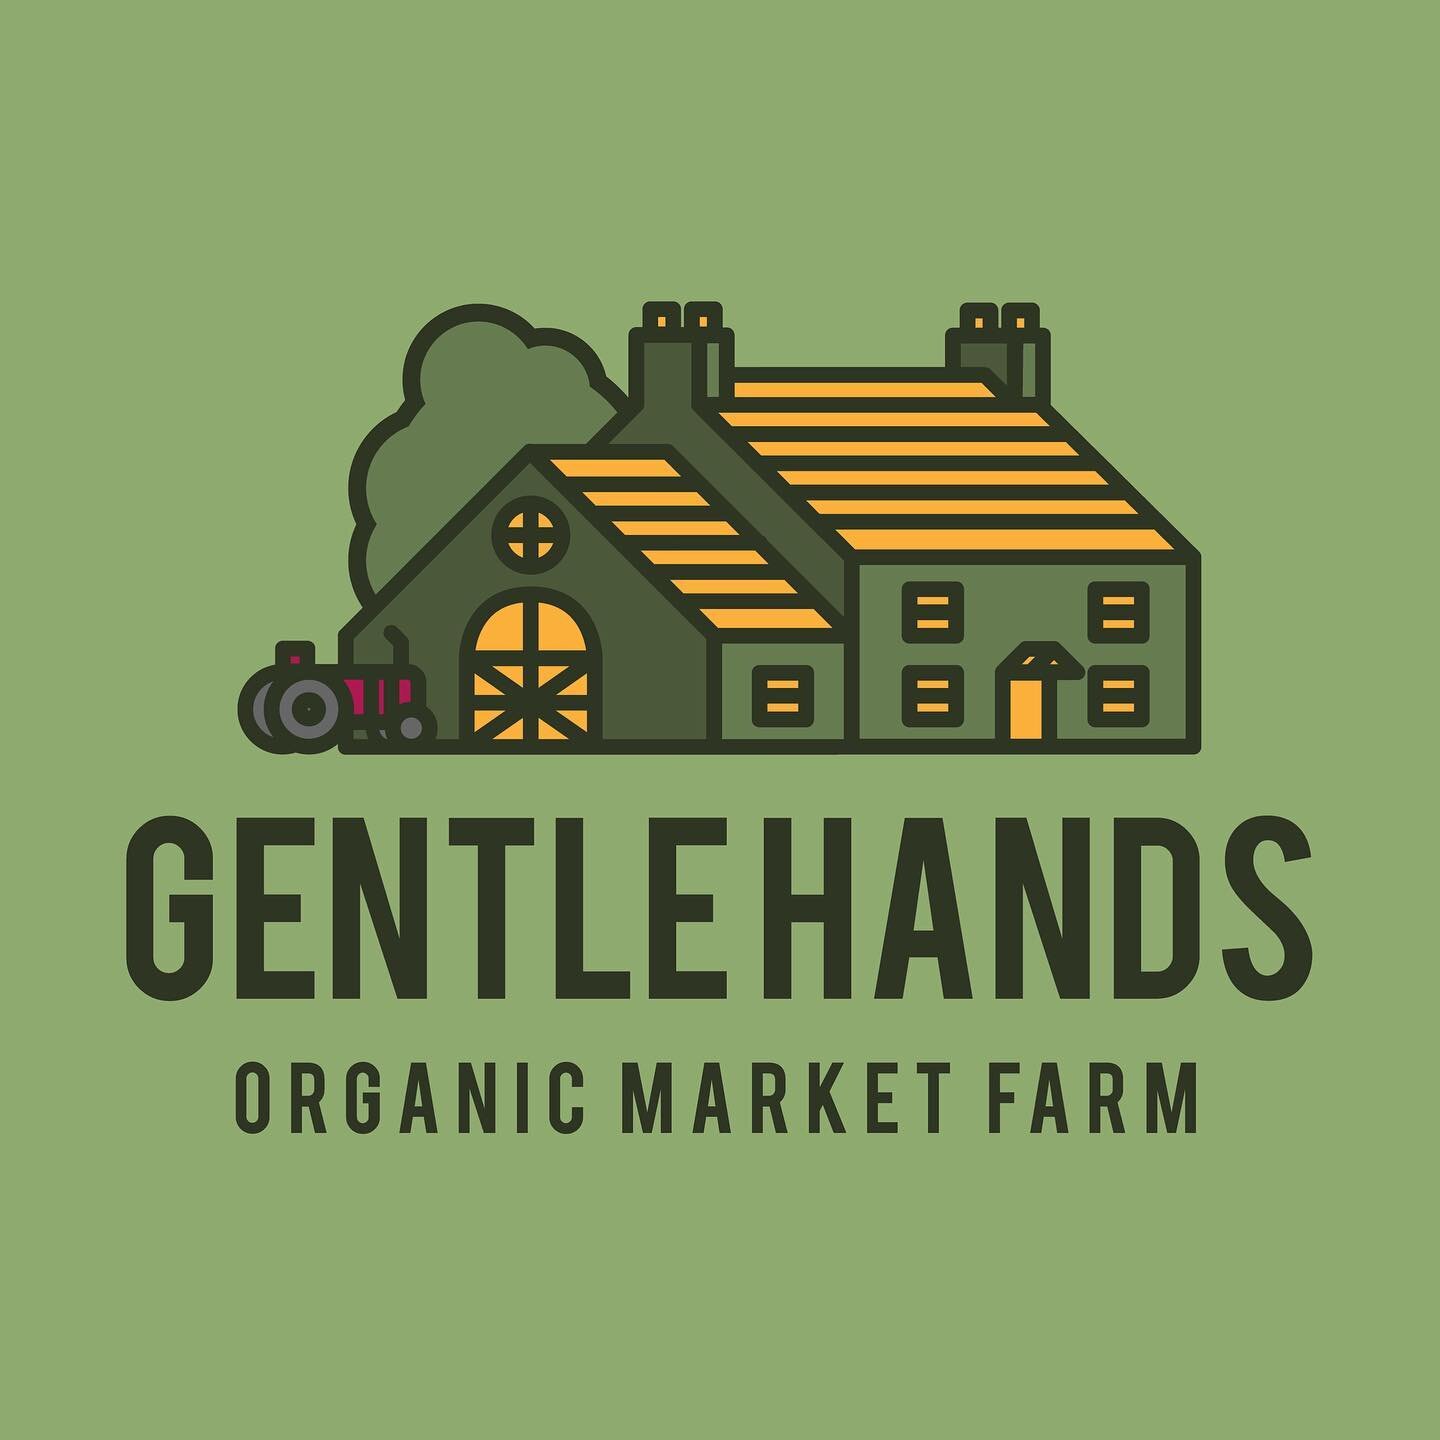 Branding created for a regenerative small market farm. Soon to be launching.